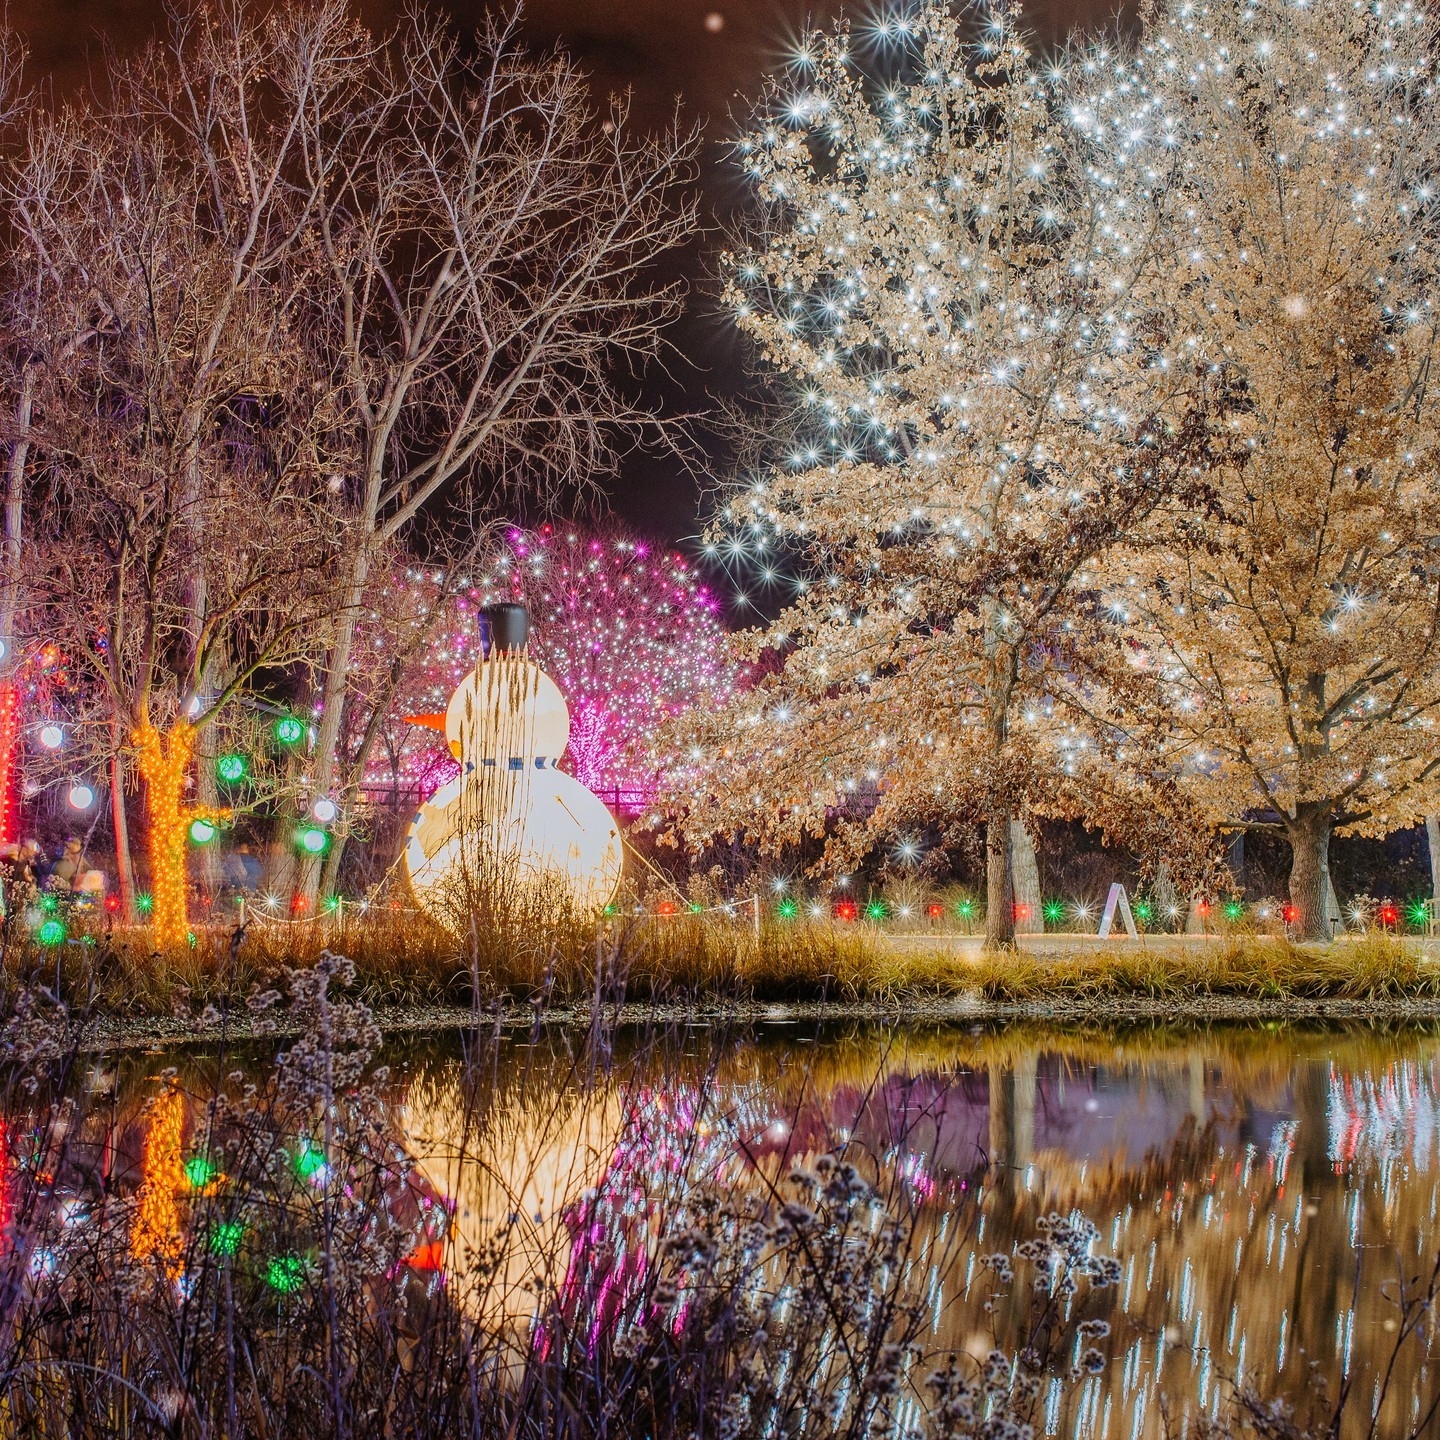 An outdoor display of christmas lights and inflated snowman. @hudsongardens